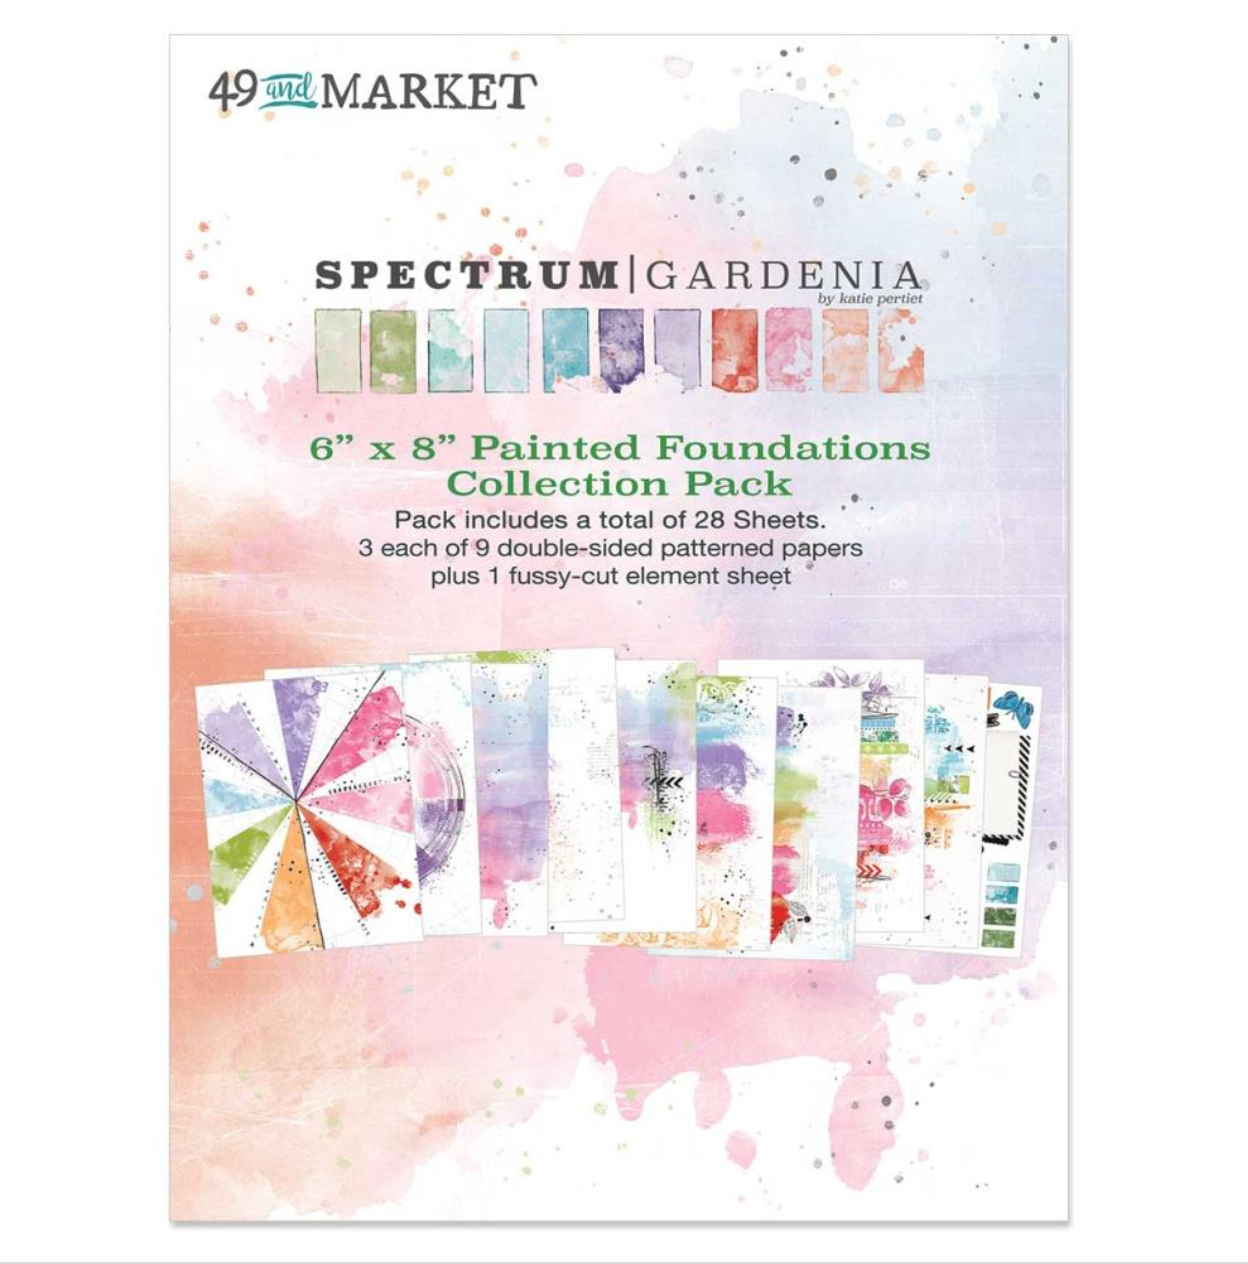 6x8 Inch - Spectrum Gardenia Painted Foundations - 49 and Market